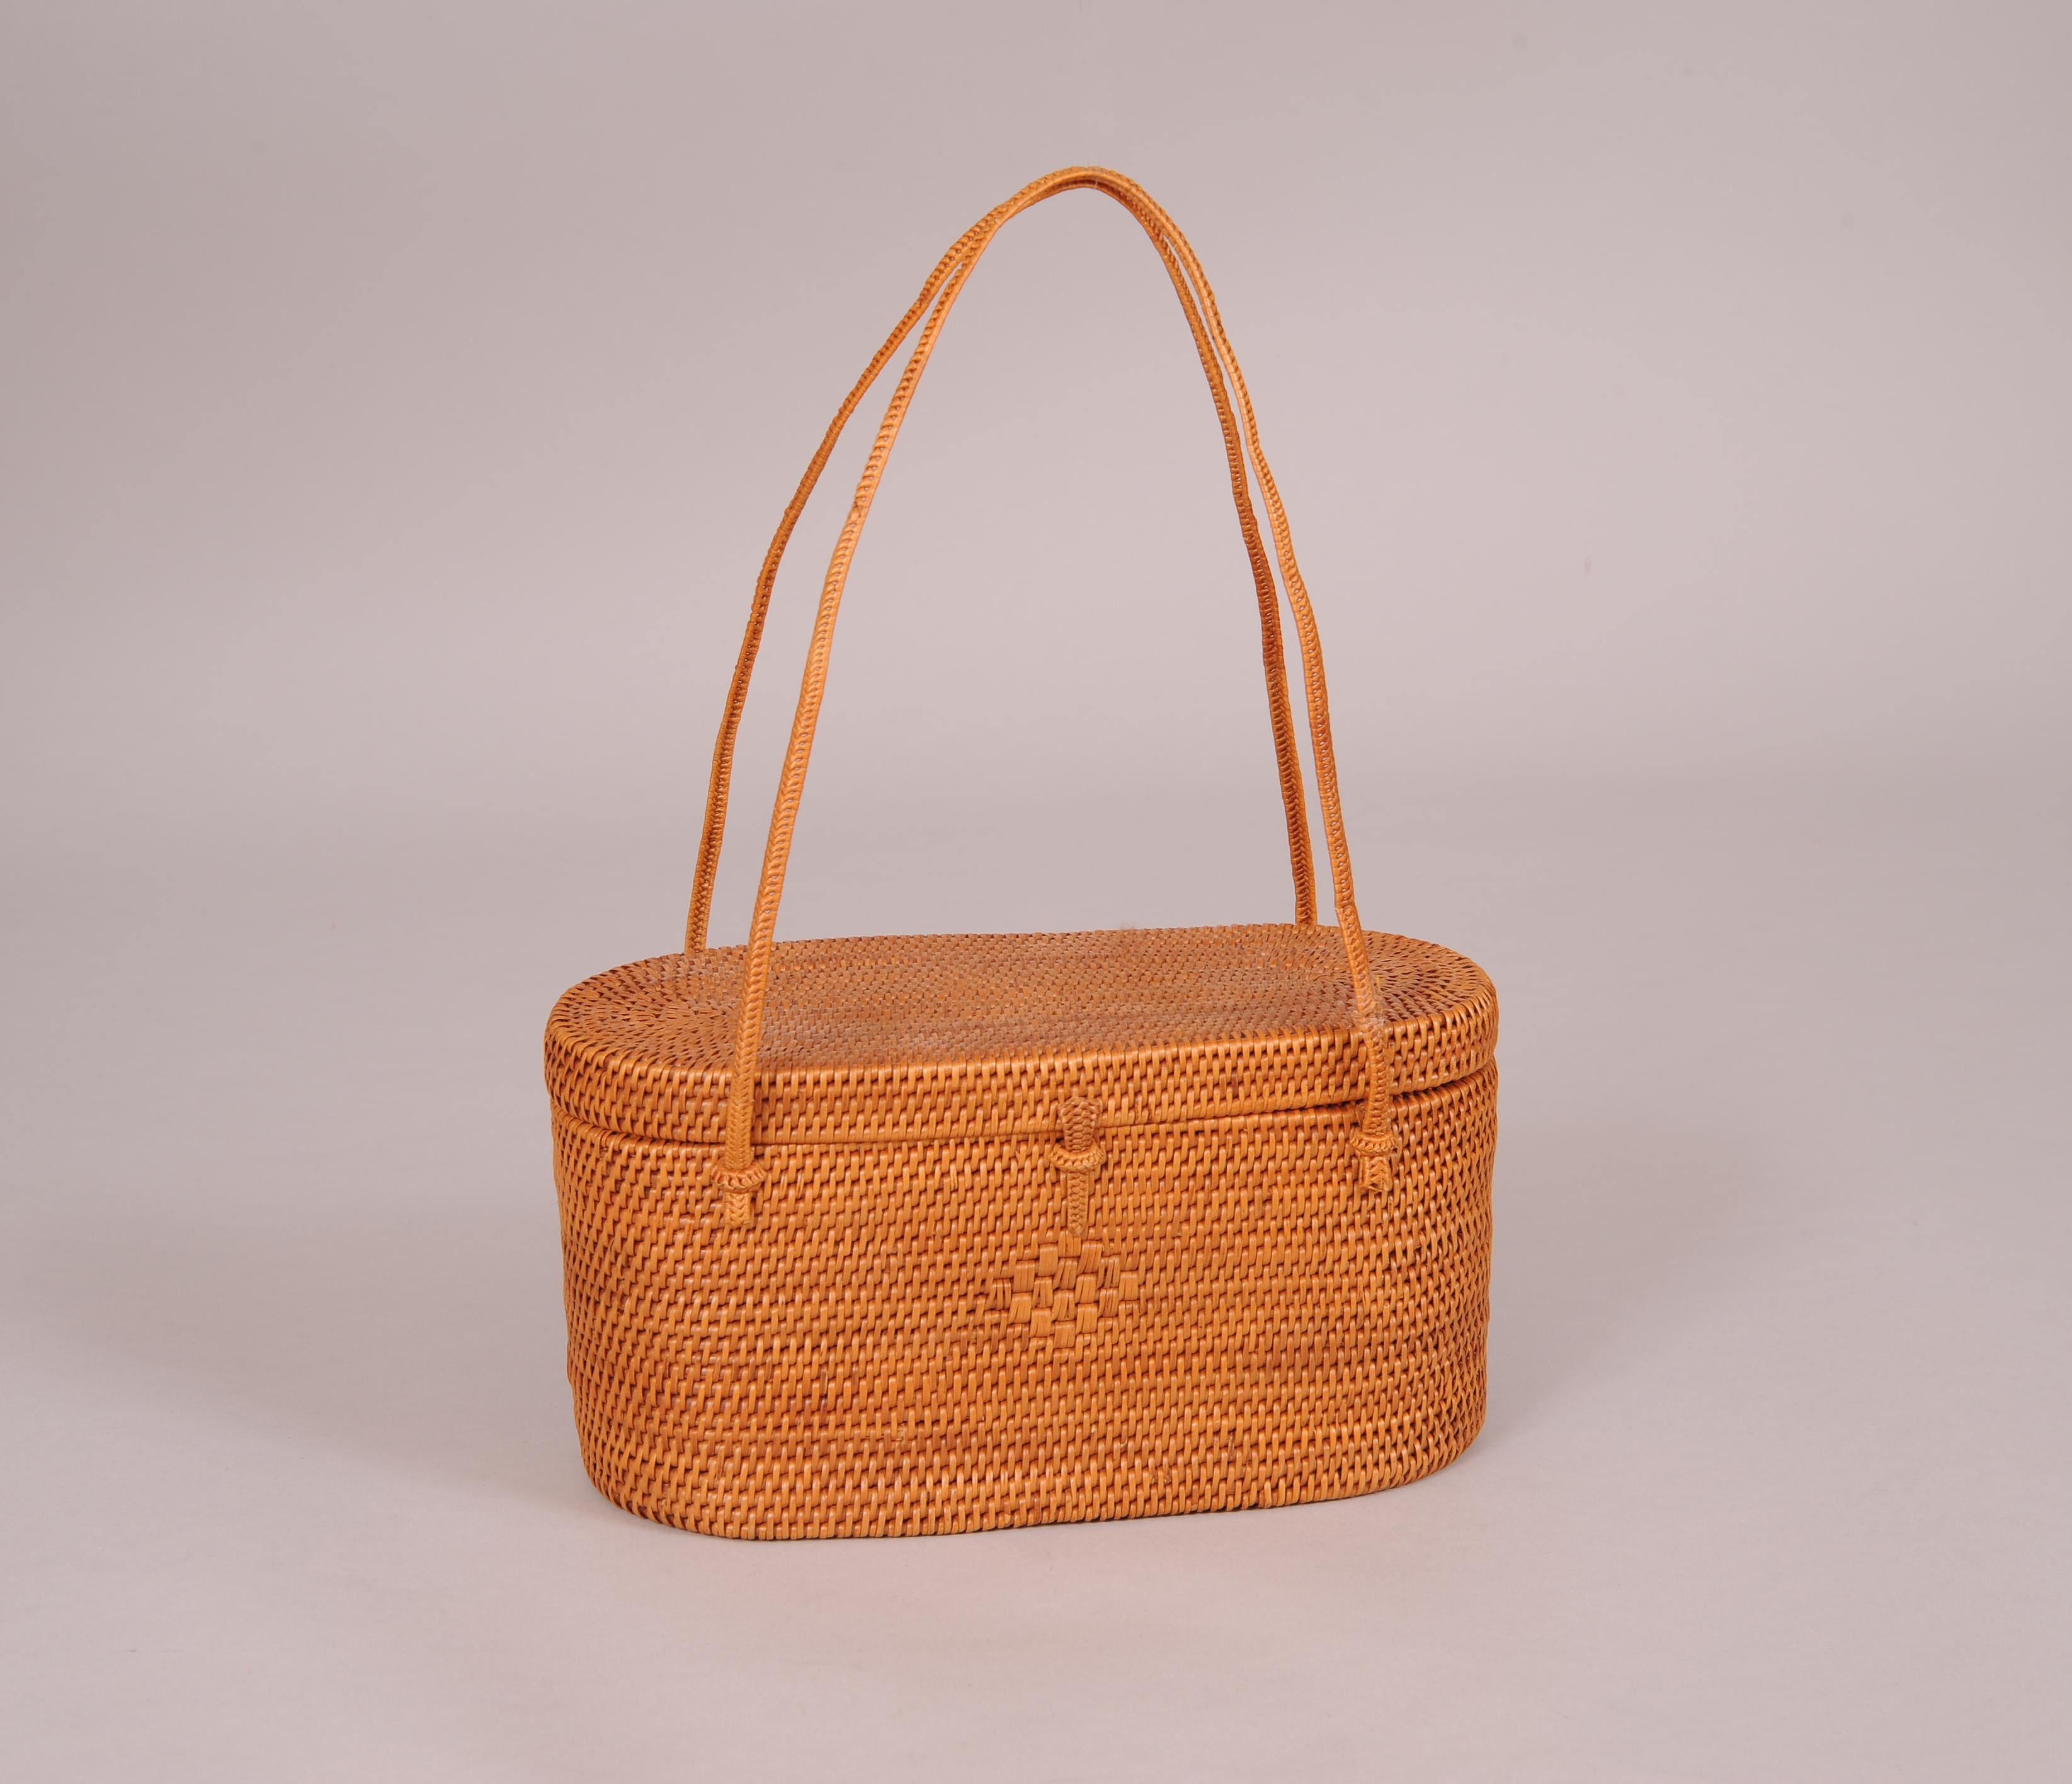 This beautifully hand woven straw bag is an oval shaped box bag from the 1950's. The top is attached with straw 